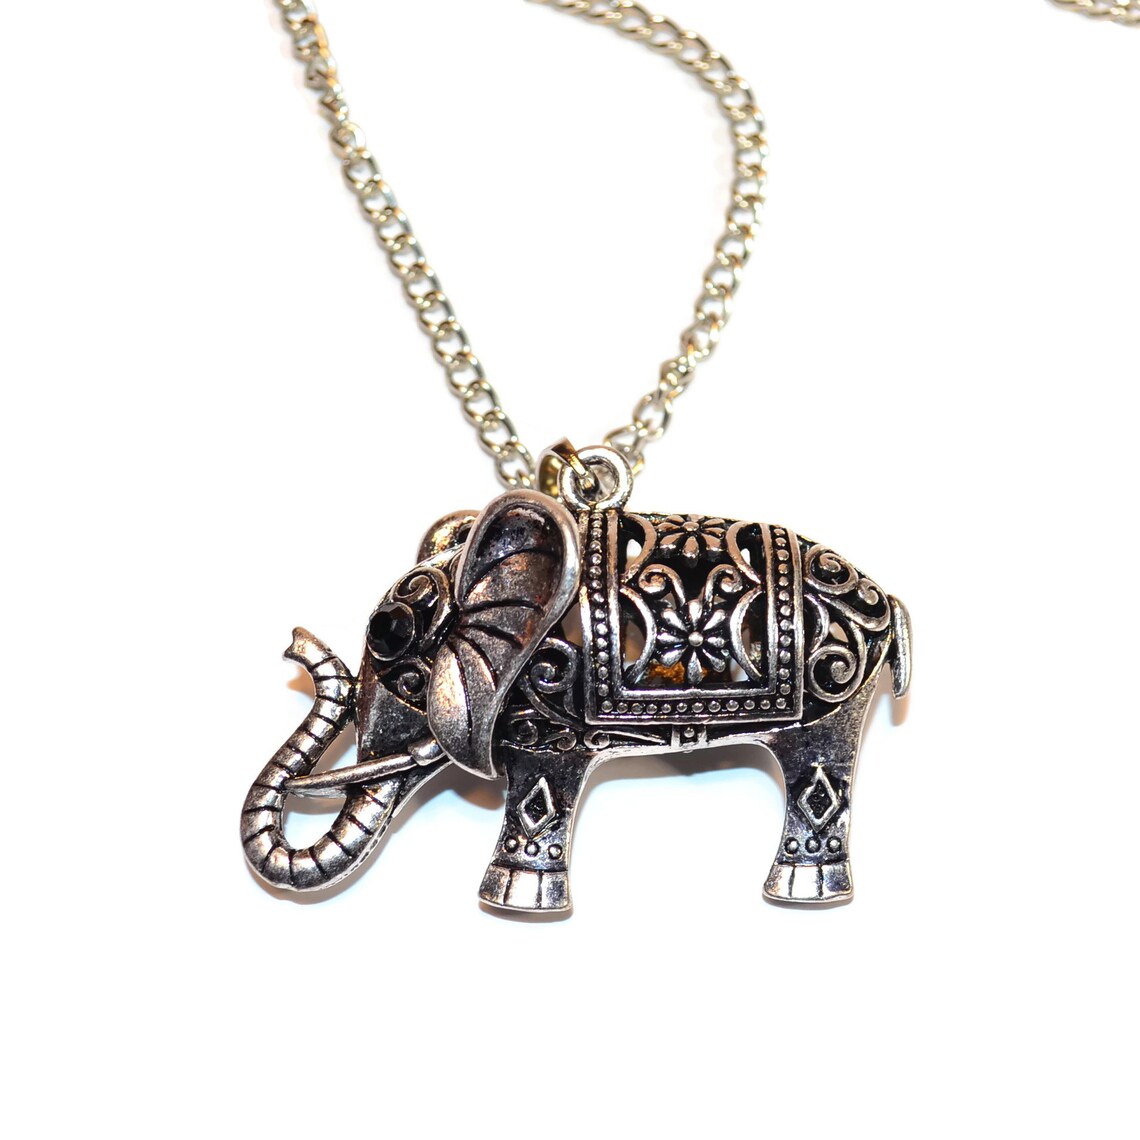 Silver elephant necklace Silver chain necklace Bali elephant | Etsy